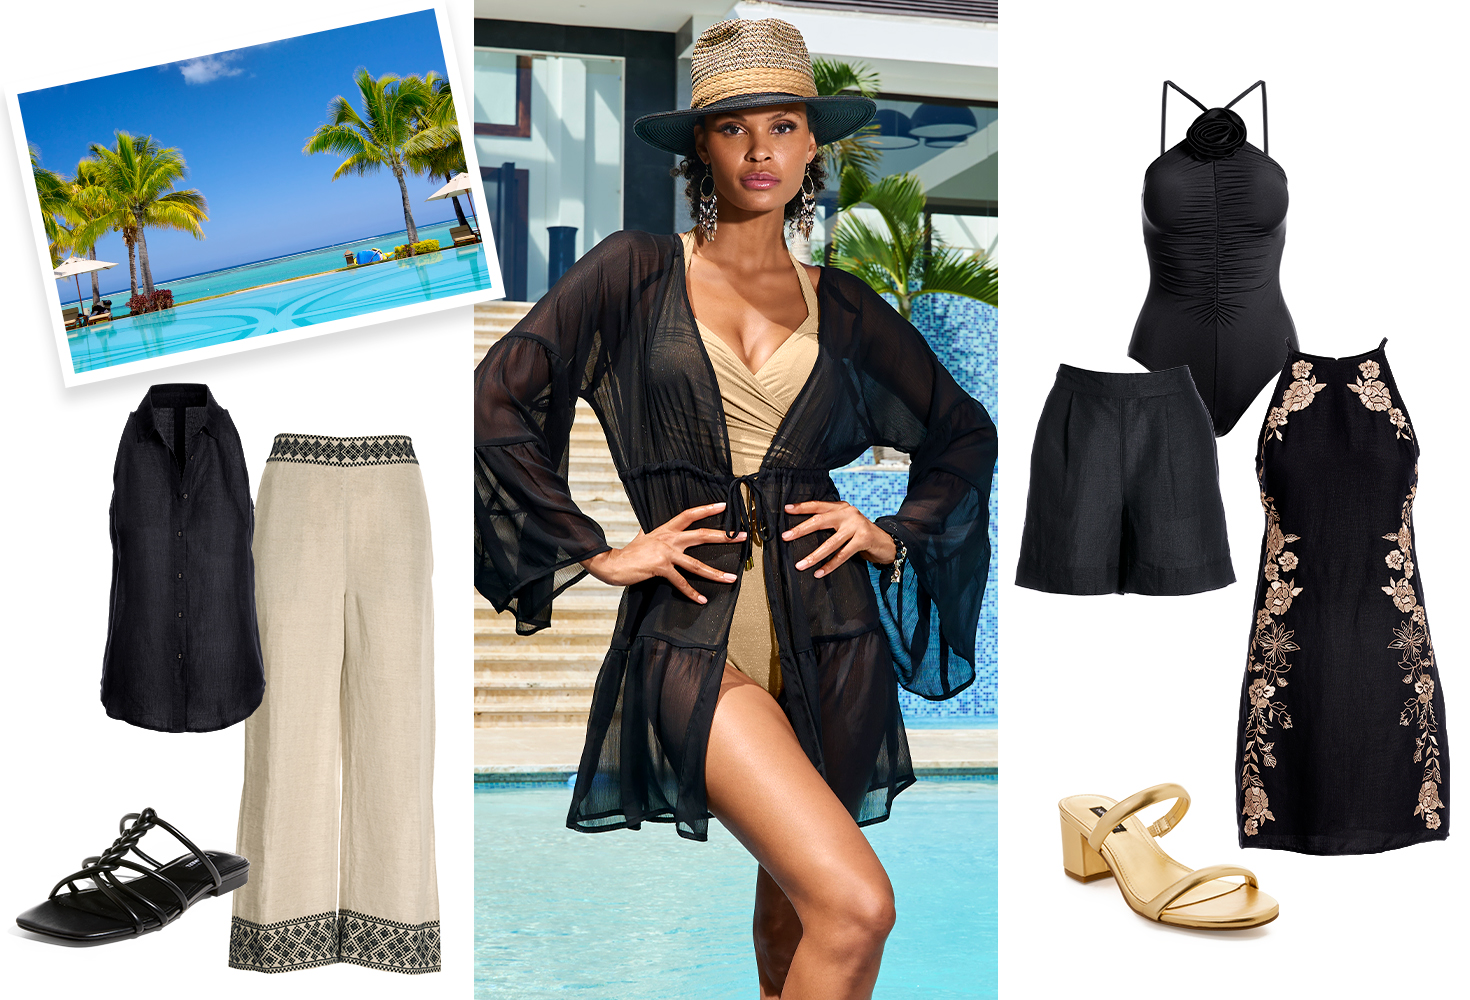 Photo collage of four outfit options for you weekend in paradise. Linen black top, linen black embroidered pants with black sandals. Models wearing gold metallic one piece with black sheer cover up and a matching hat. Swim suit option of black rosette one piece, linen shorts and a high neck dress and golden sandal.